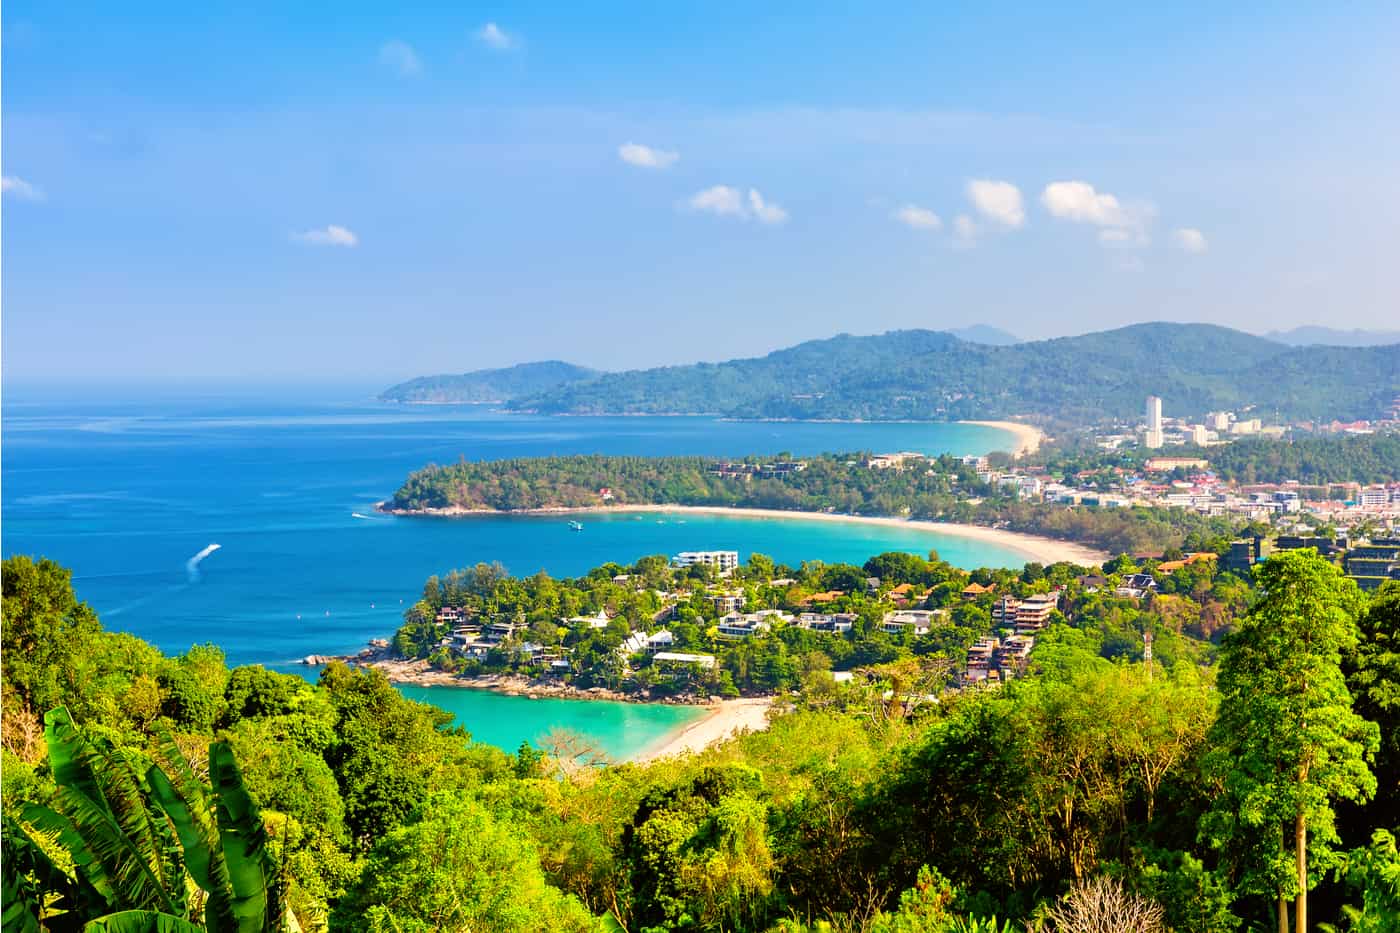 Central Phuket - 1st Time in Southeast Asia and Phuket